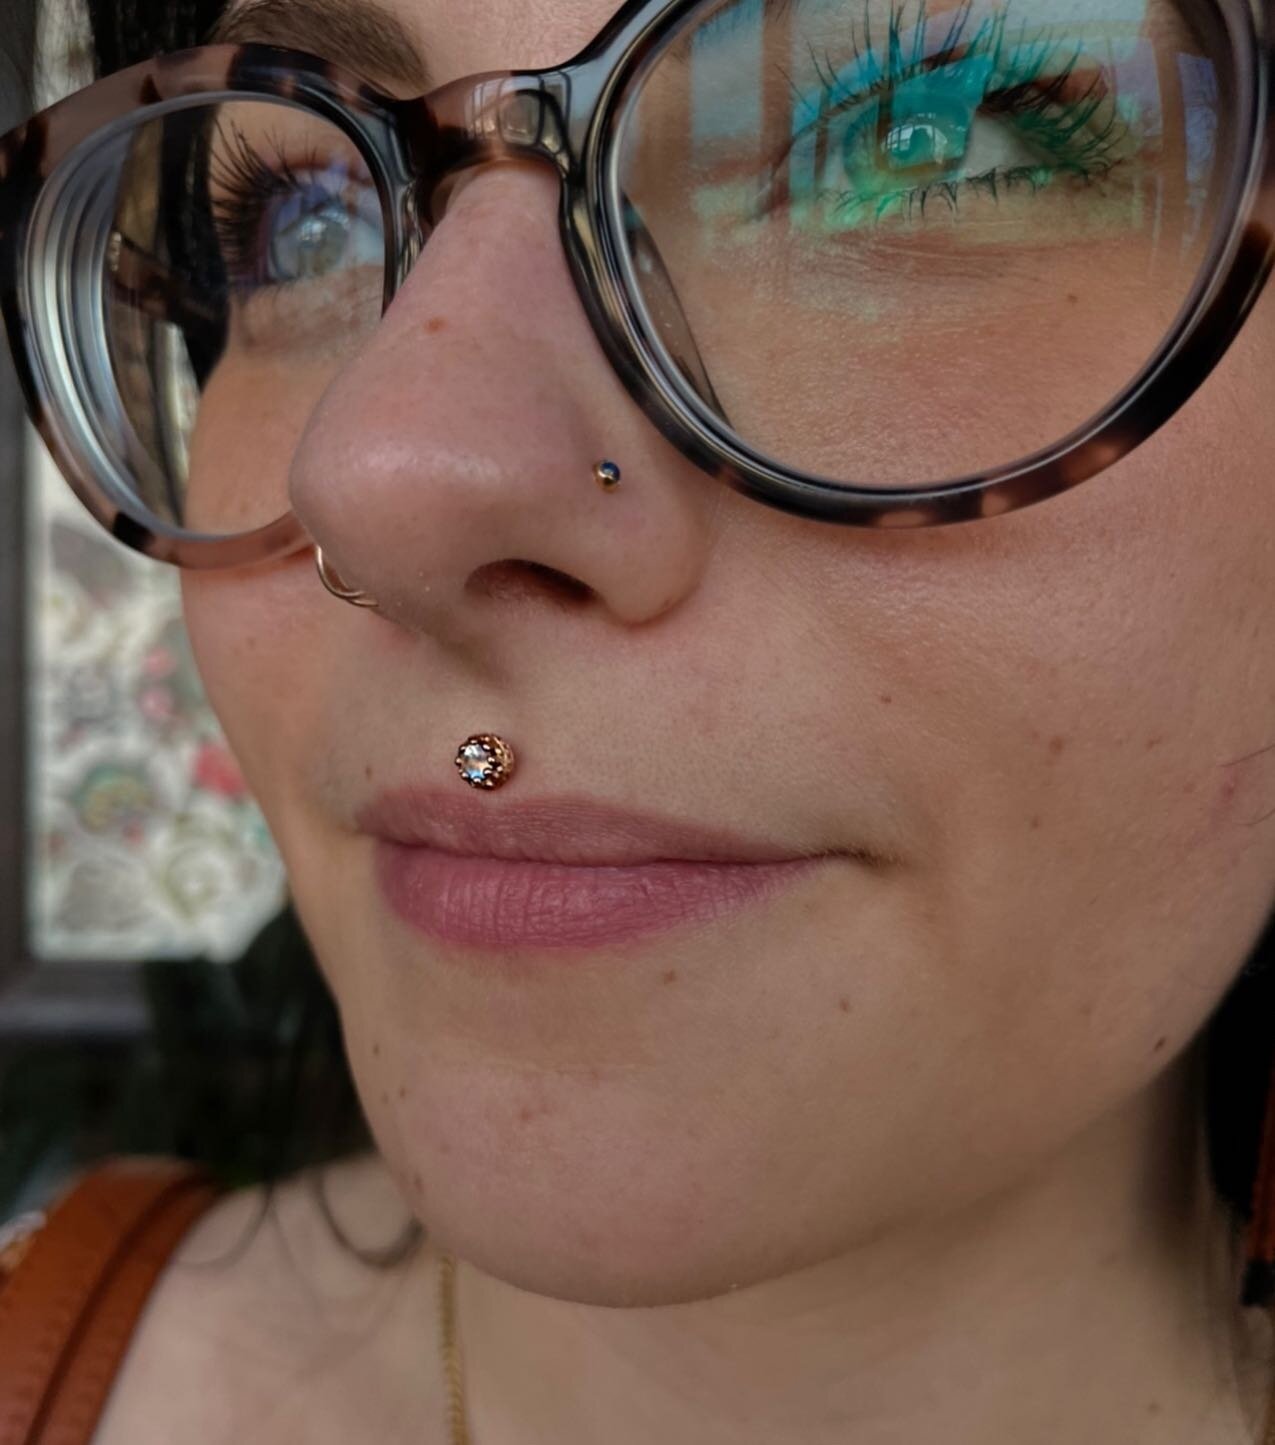 #Repost @selina.n.ryan​
---​
✨ETHEREAL GIRL✨ Crown set Rainbow Moonstone in Rose Gold from bvla for this queen&rsquo;s healed philtrum 😍 I absolutely adore a genuine stone! Each one is an organic, unique gift to the Earth, just like you! Come adorn 